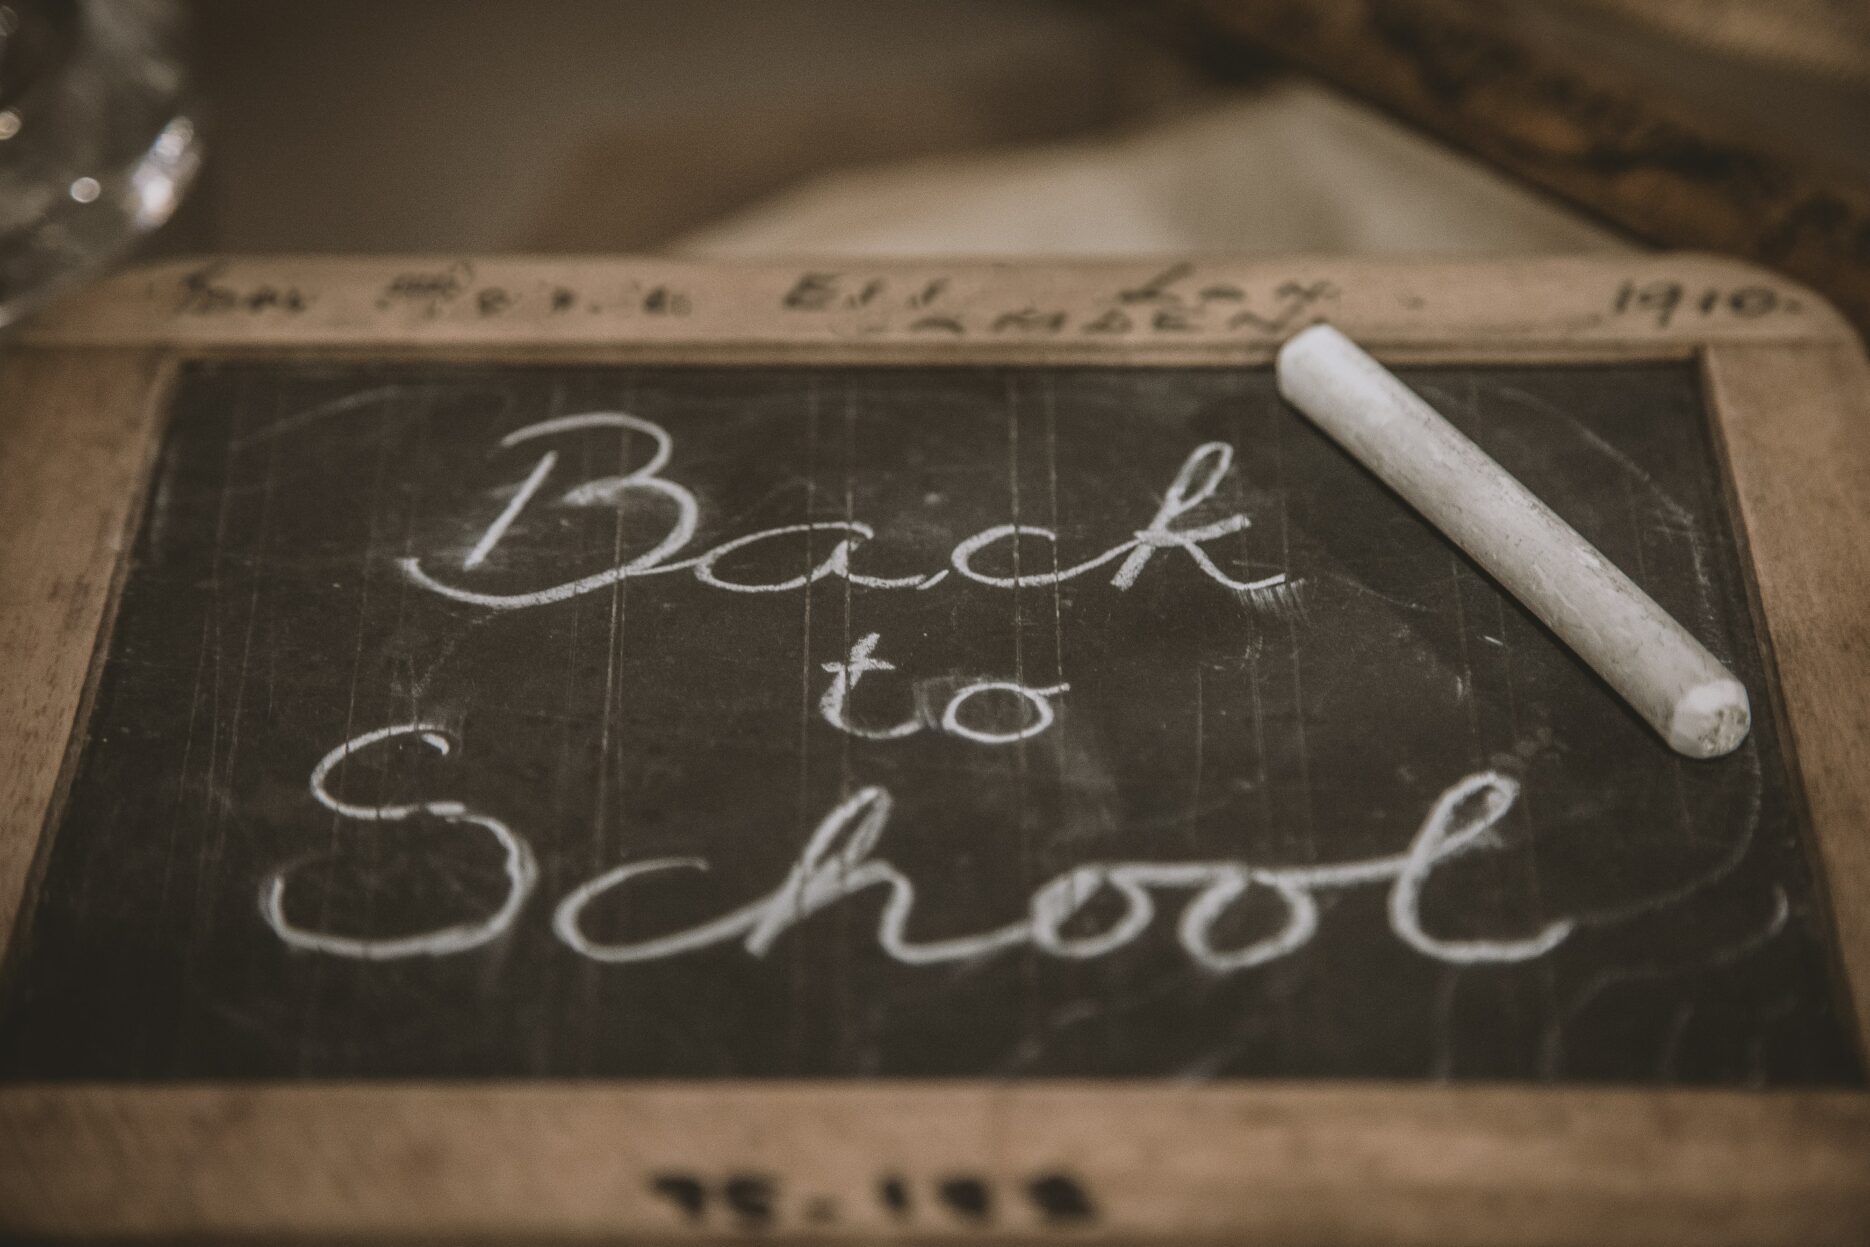 A photo of a chalkboard reads "Back to School" in white chalk cursive writing.